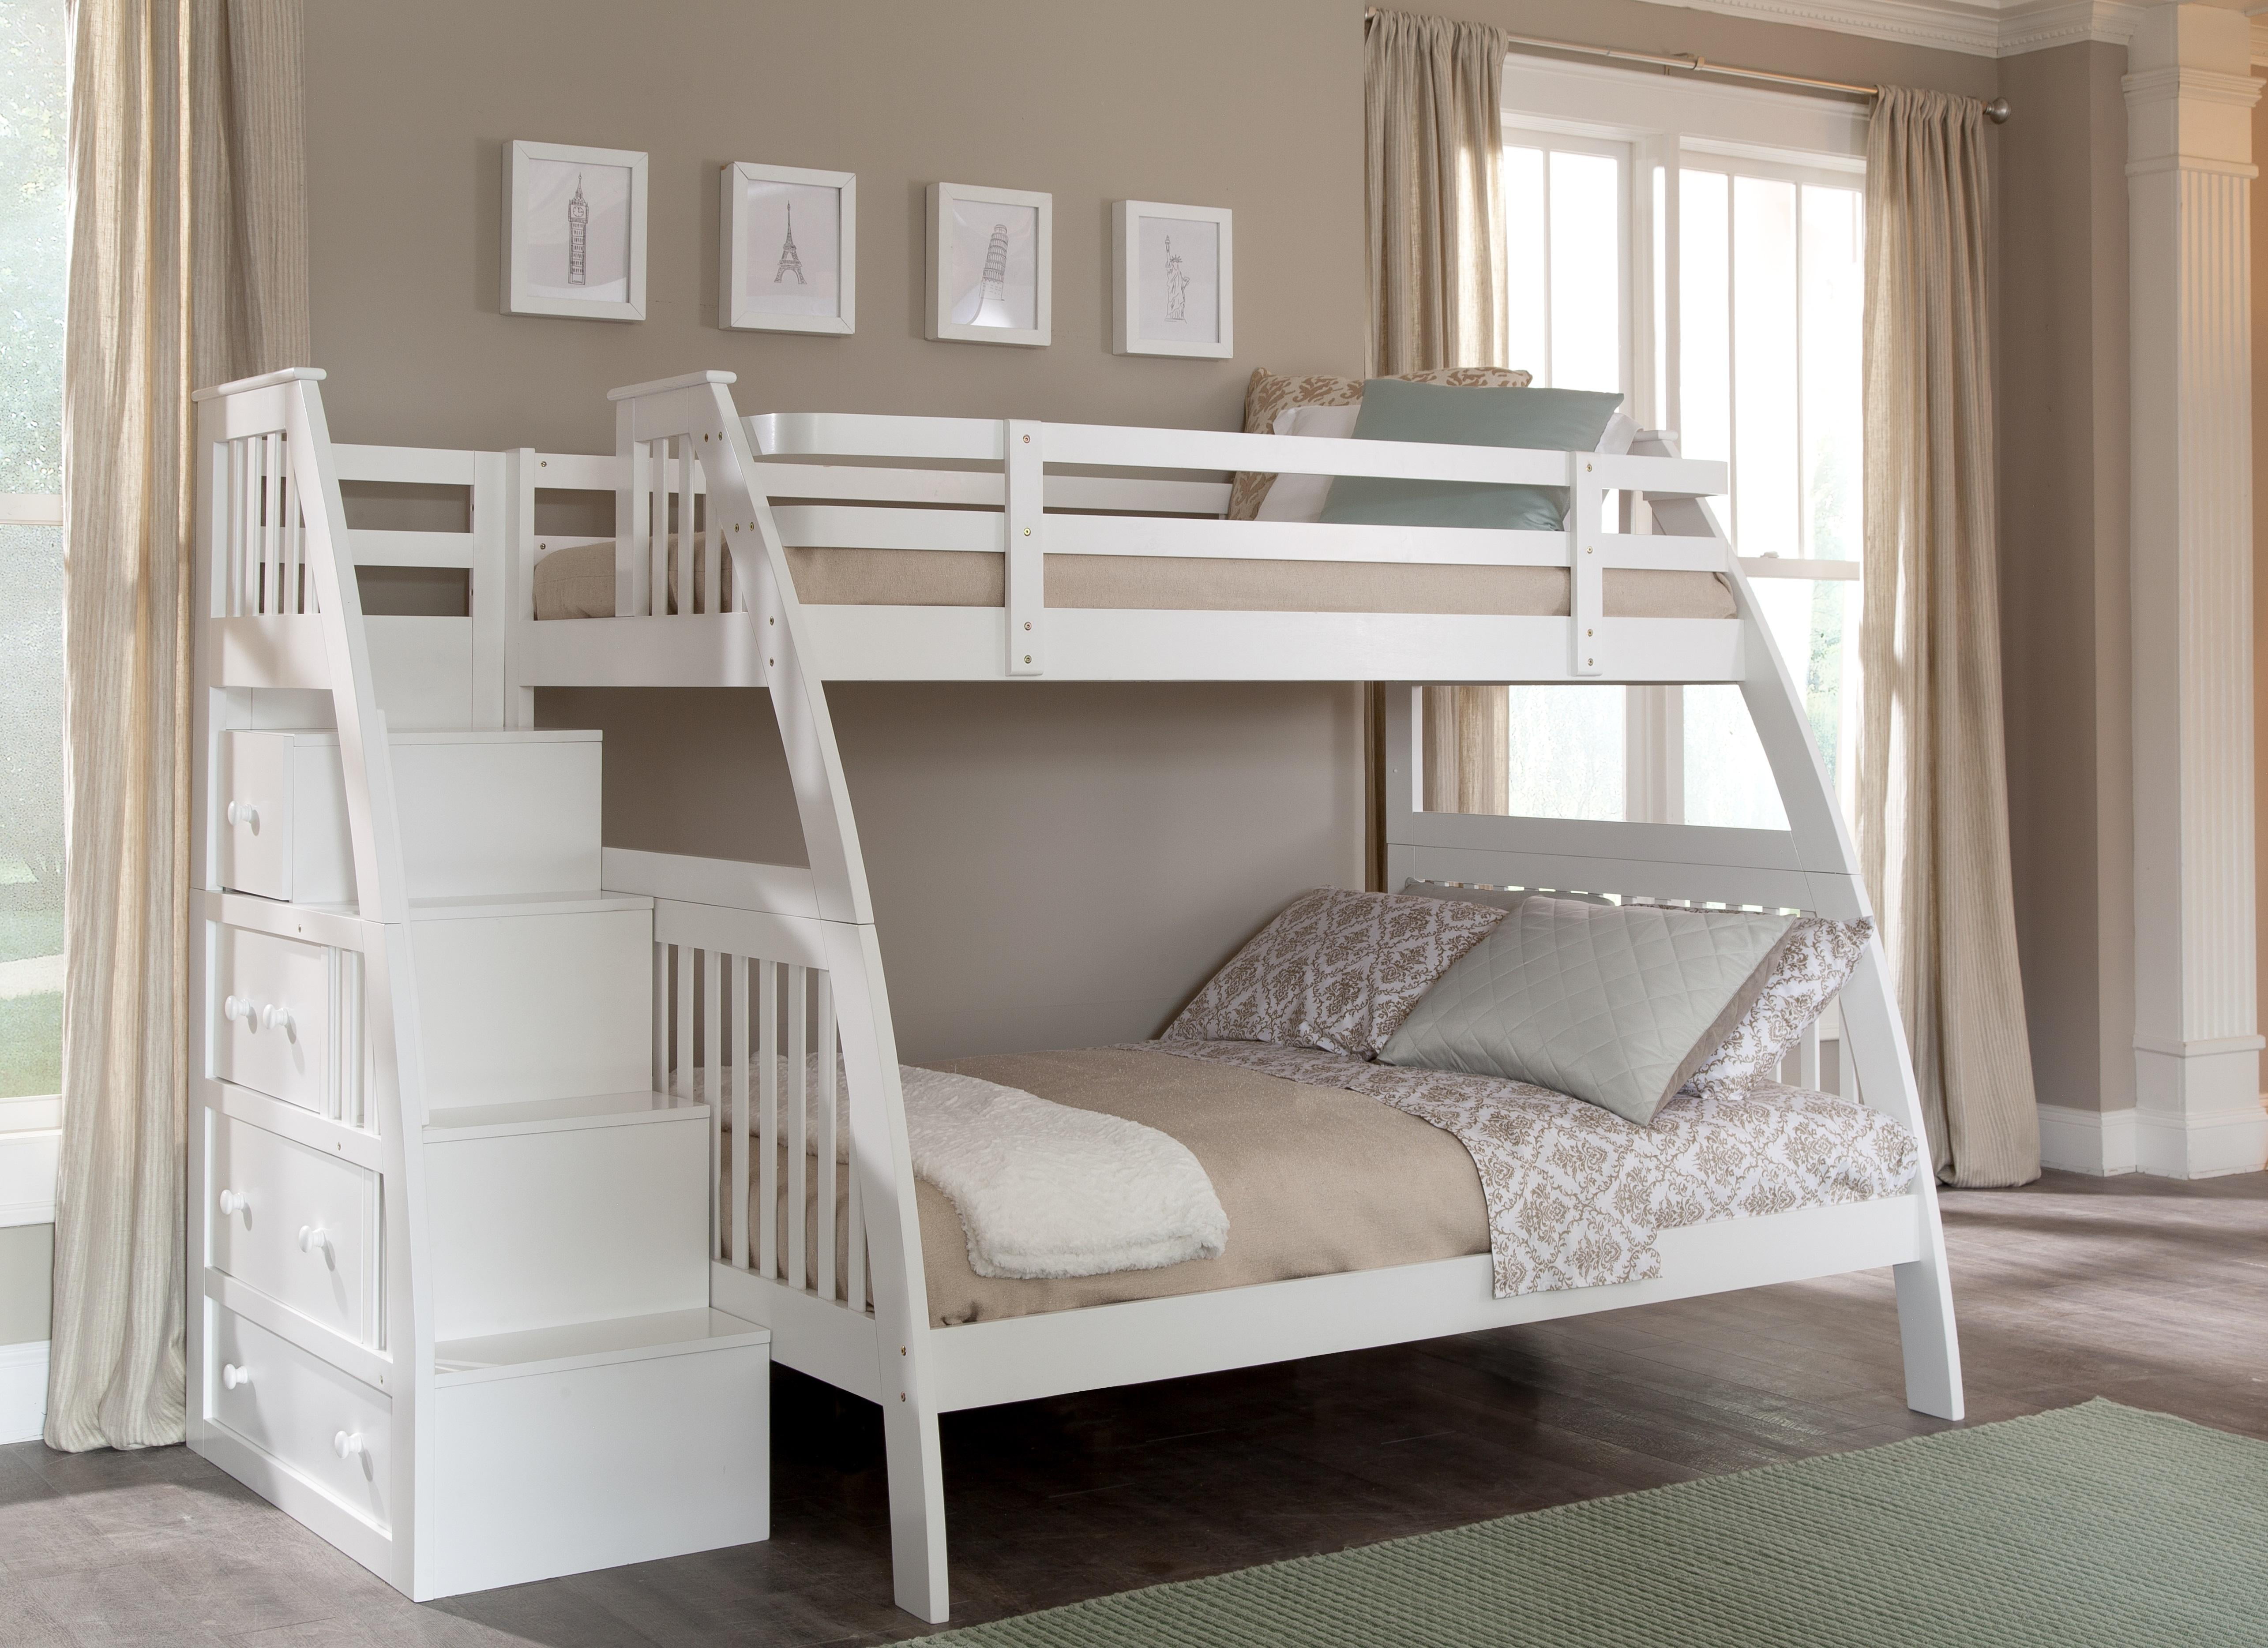 Full Over Queen Bunk Bed Ikea, Twin Over Full Bunk Bed With Trundle Ikea